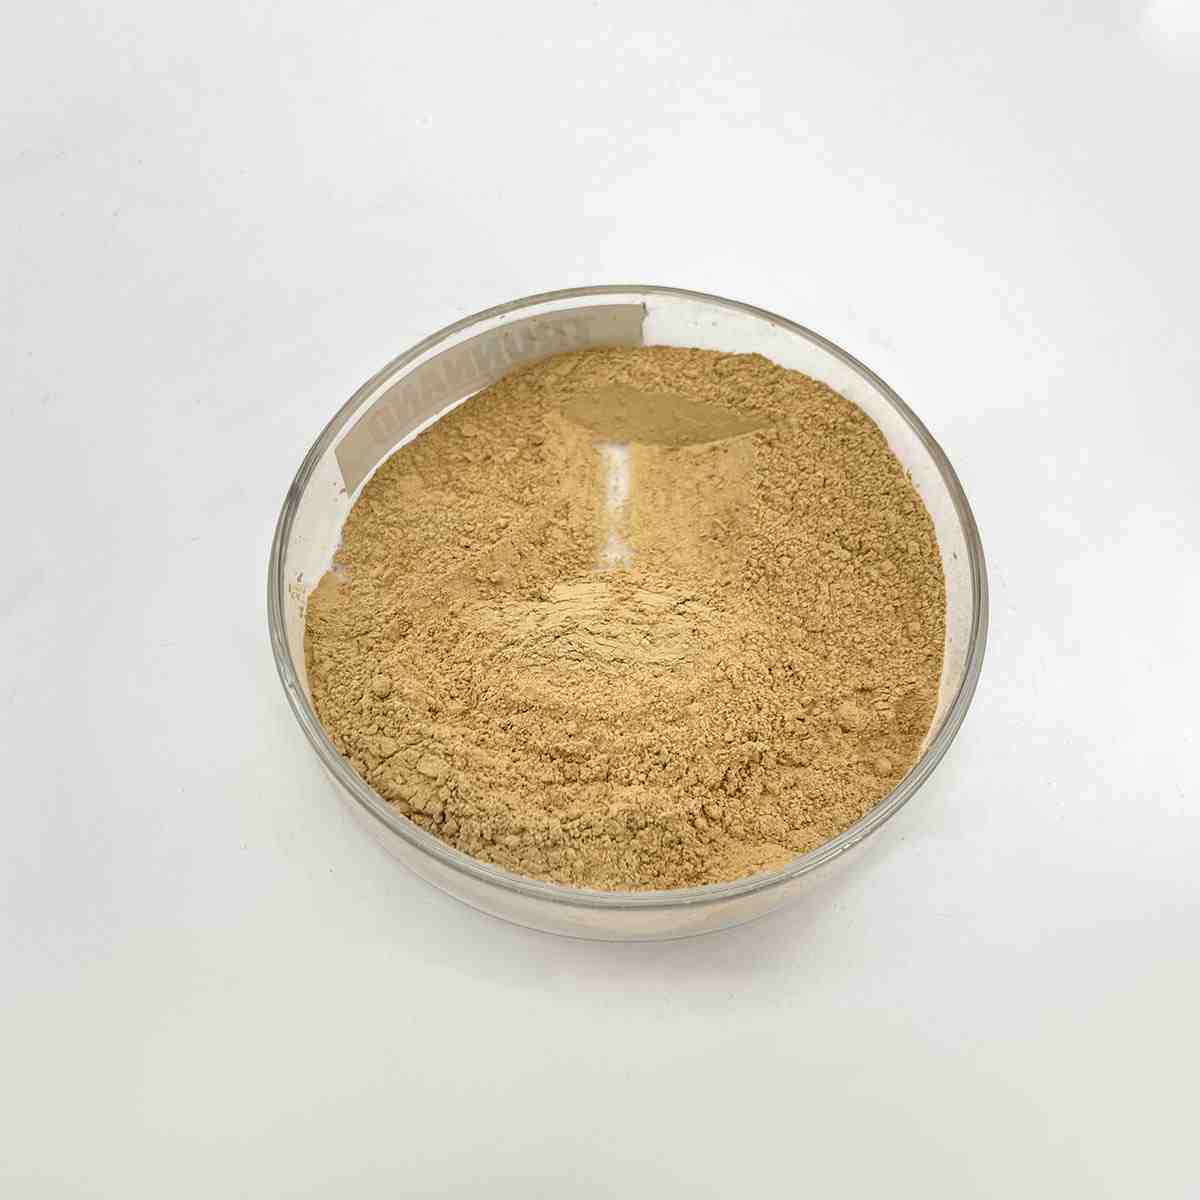 JR400 polyquaternary ammonium salt-10 cationic cellulose water-soluble cationic polymer antistatic adjuster 